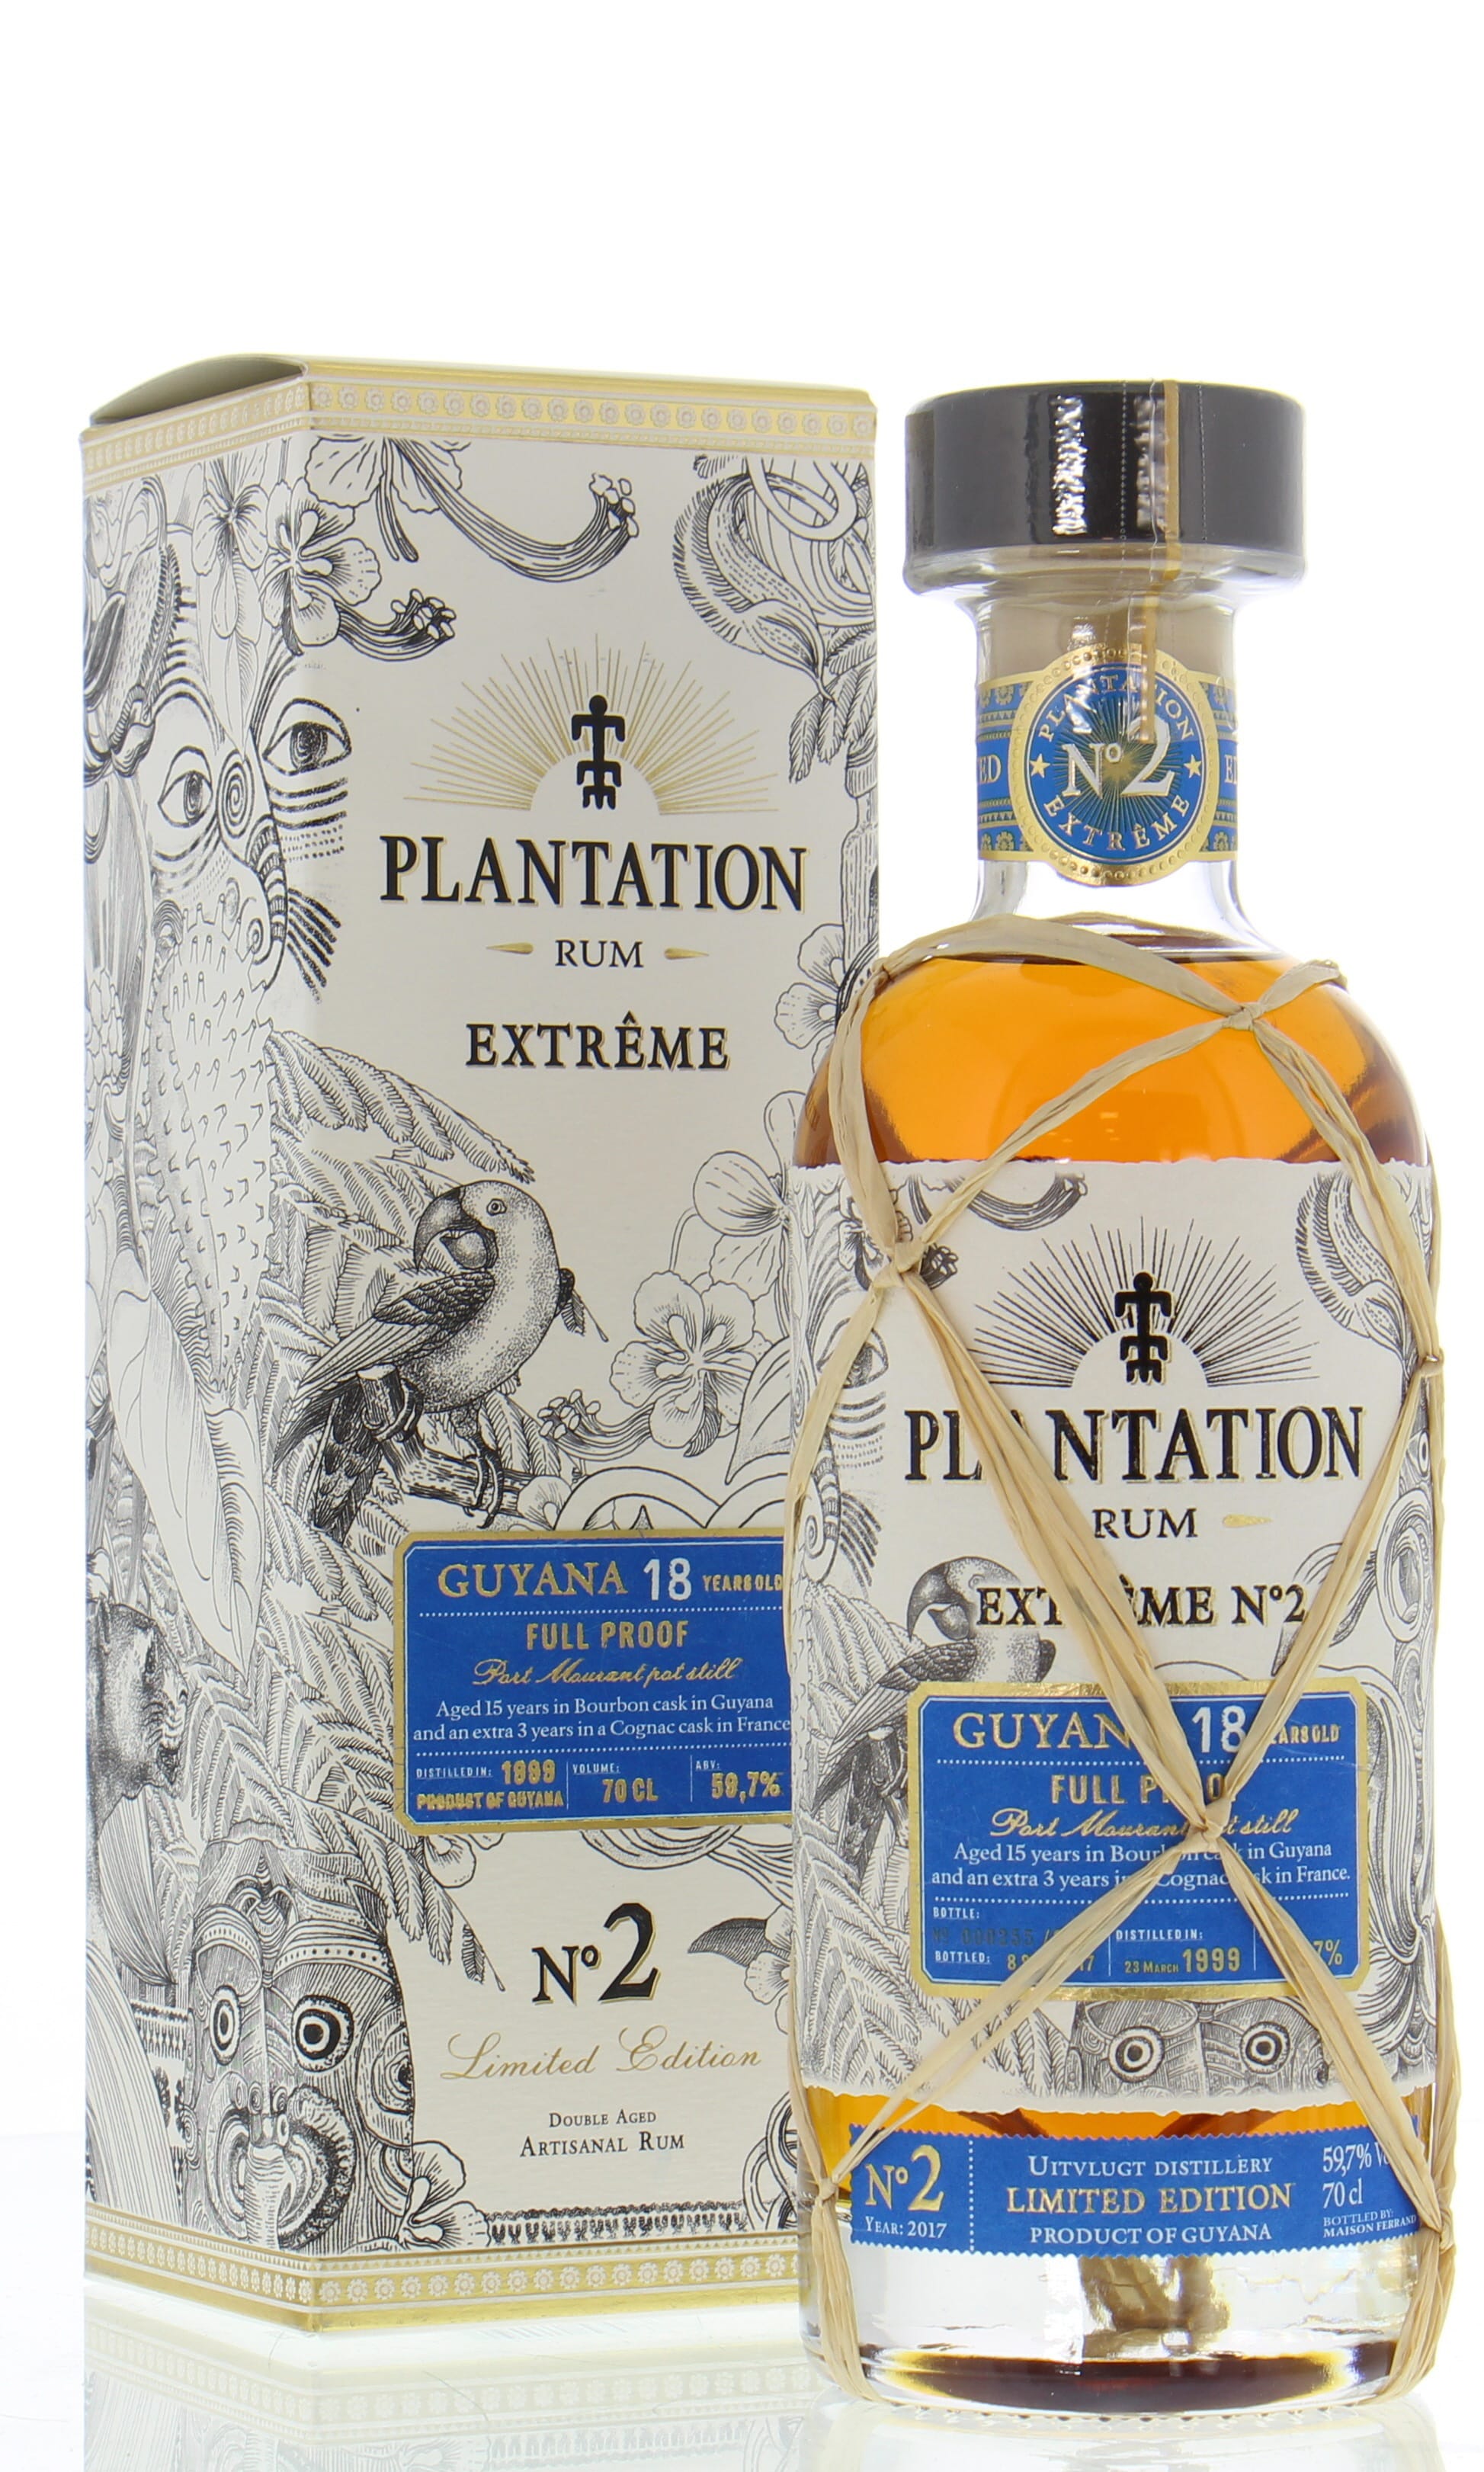 Plantation Rum - Uitvlugt 18 Years Old Guyana Extreme No2 Limited Edition 59.7% 1999 In Original Carton